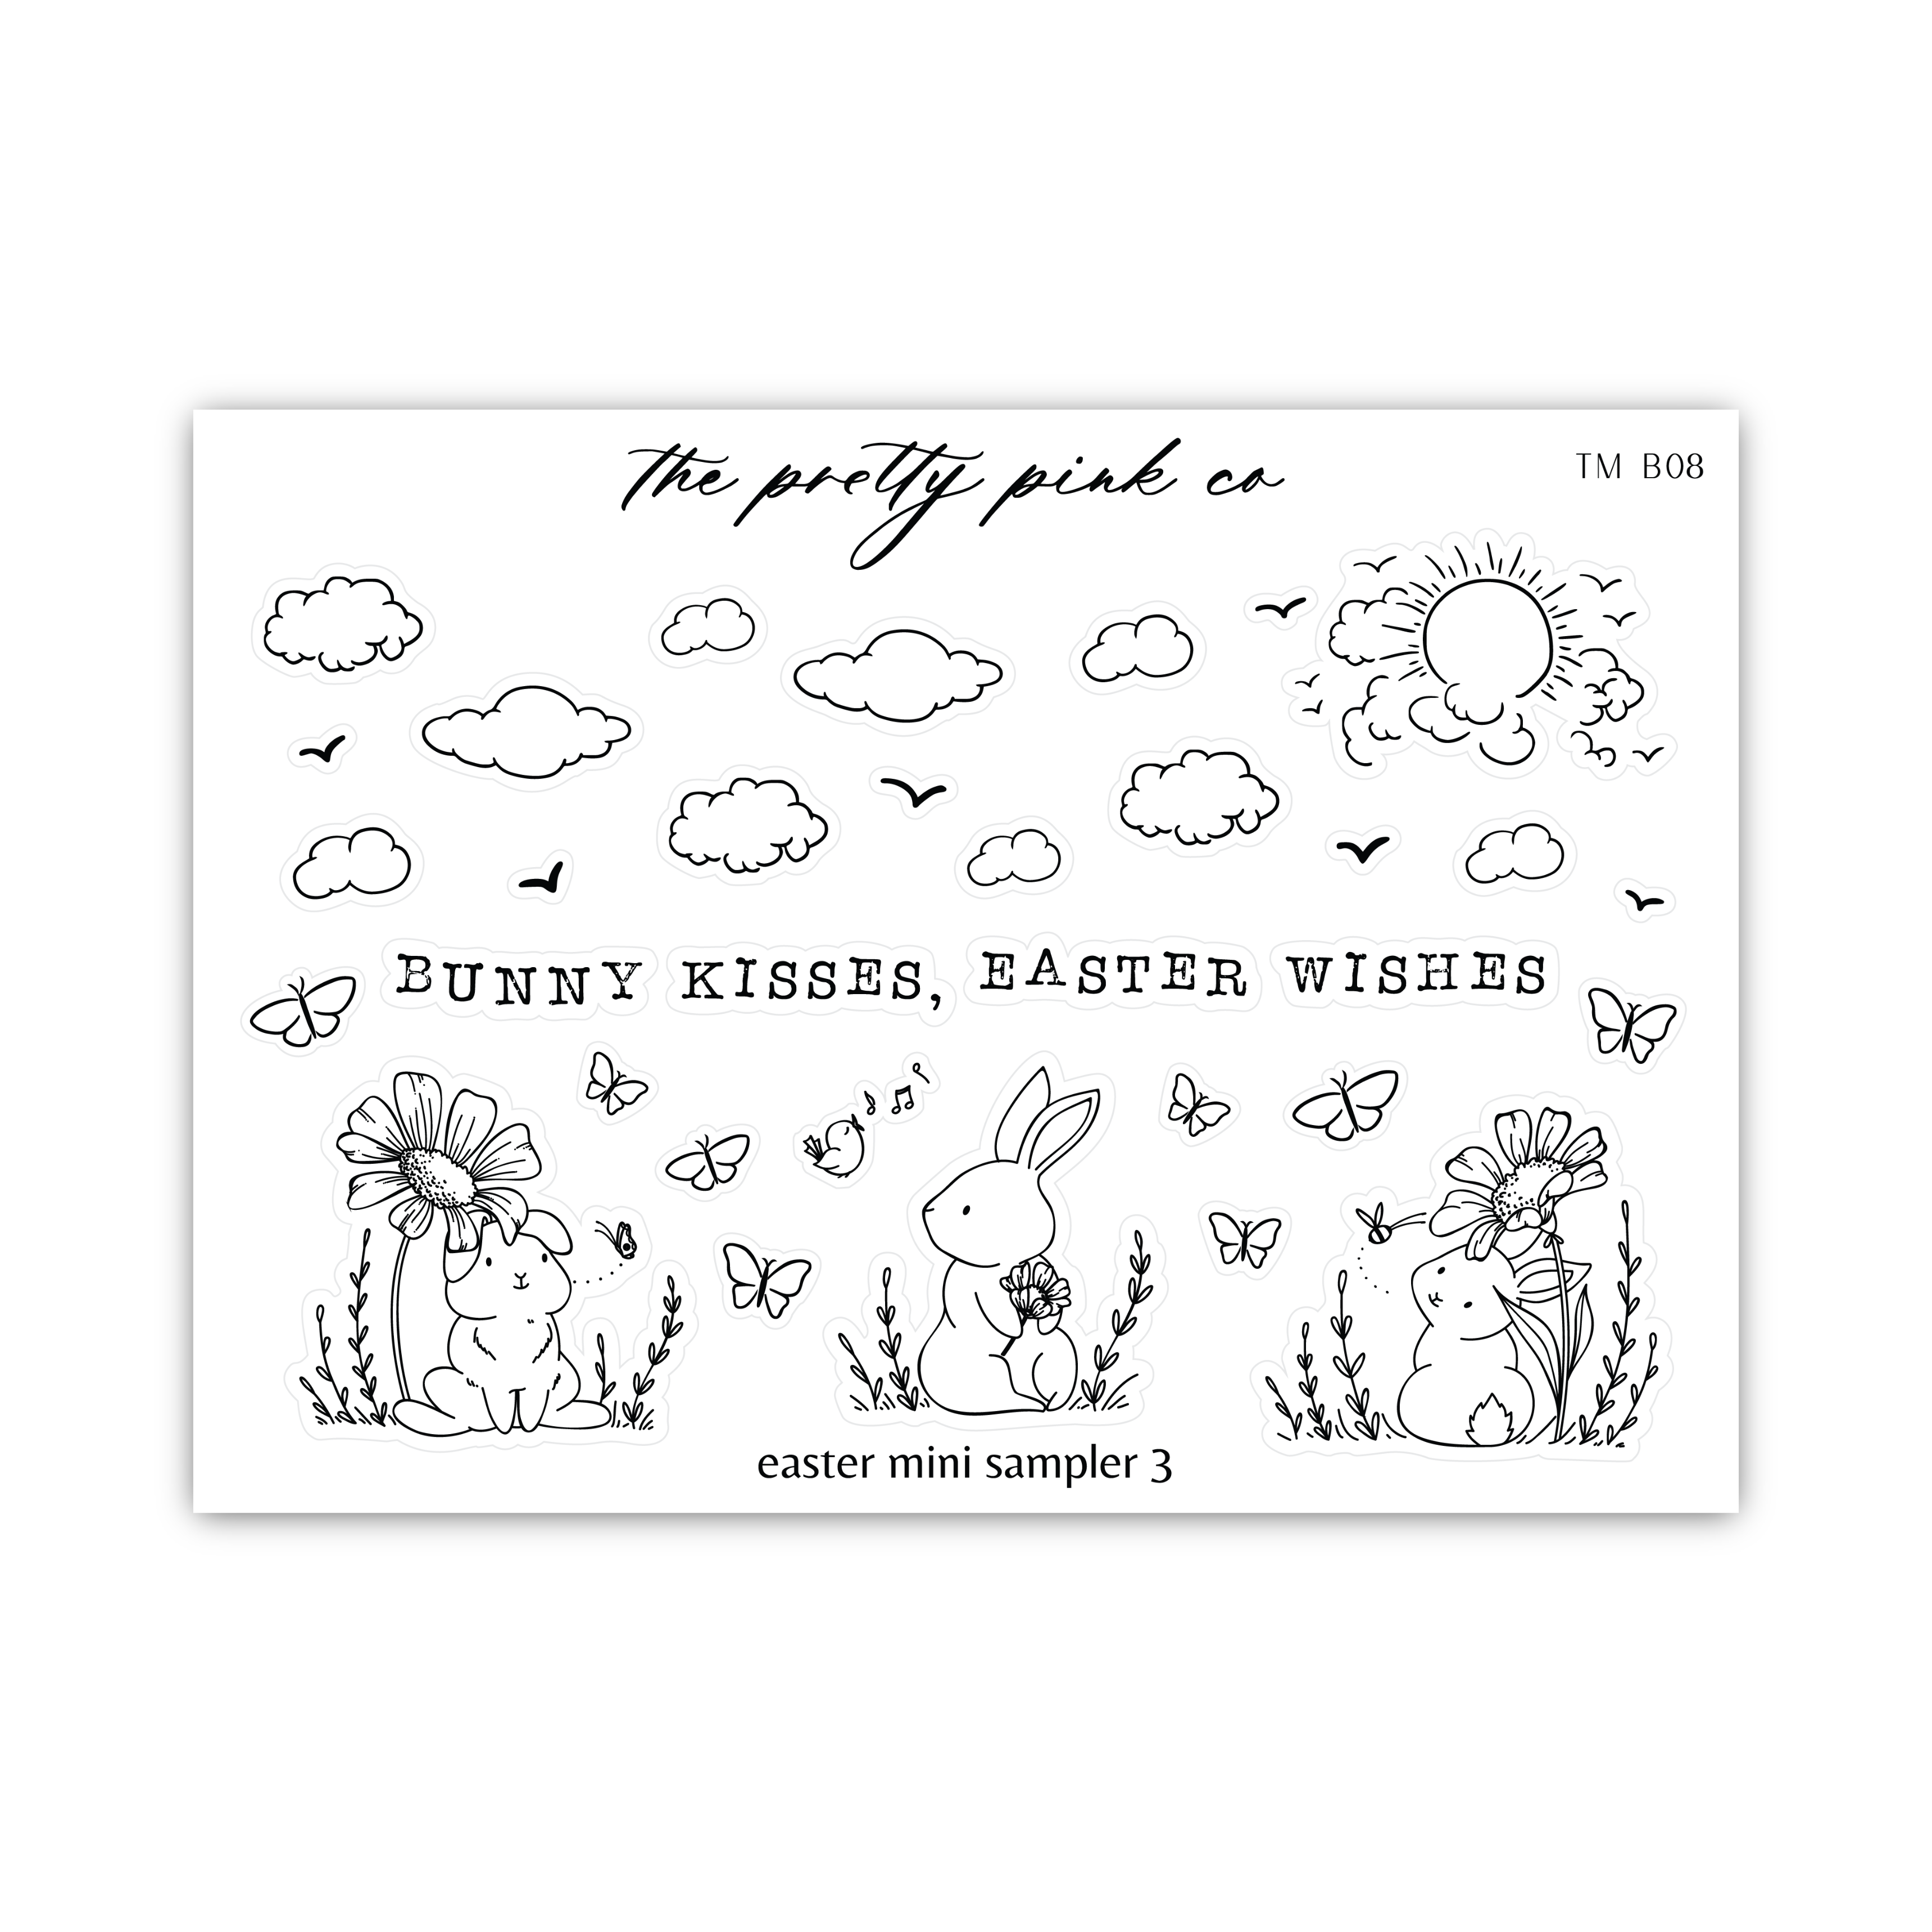 a stamp that says bunny kisses, easter wishes